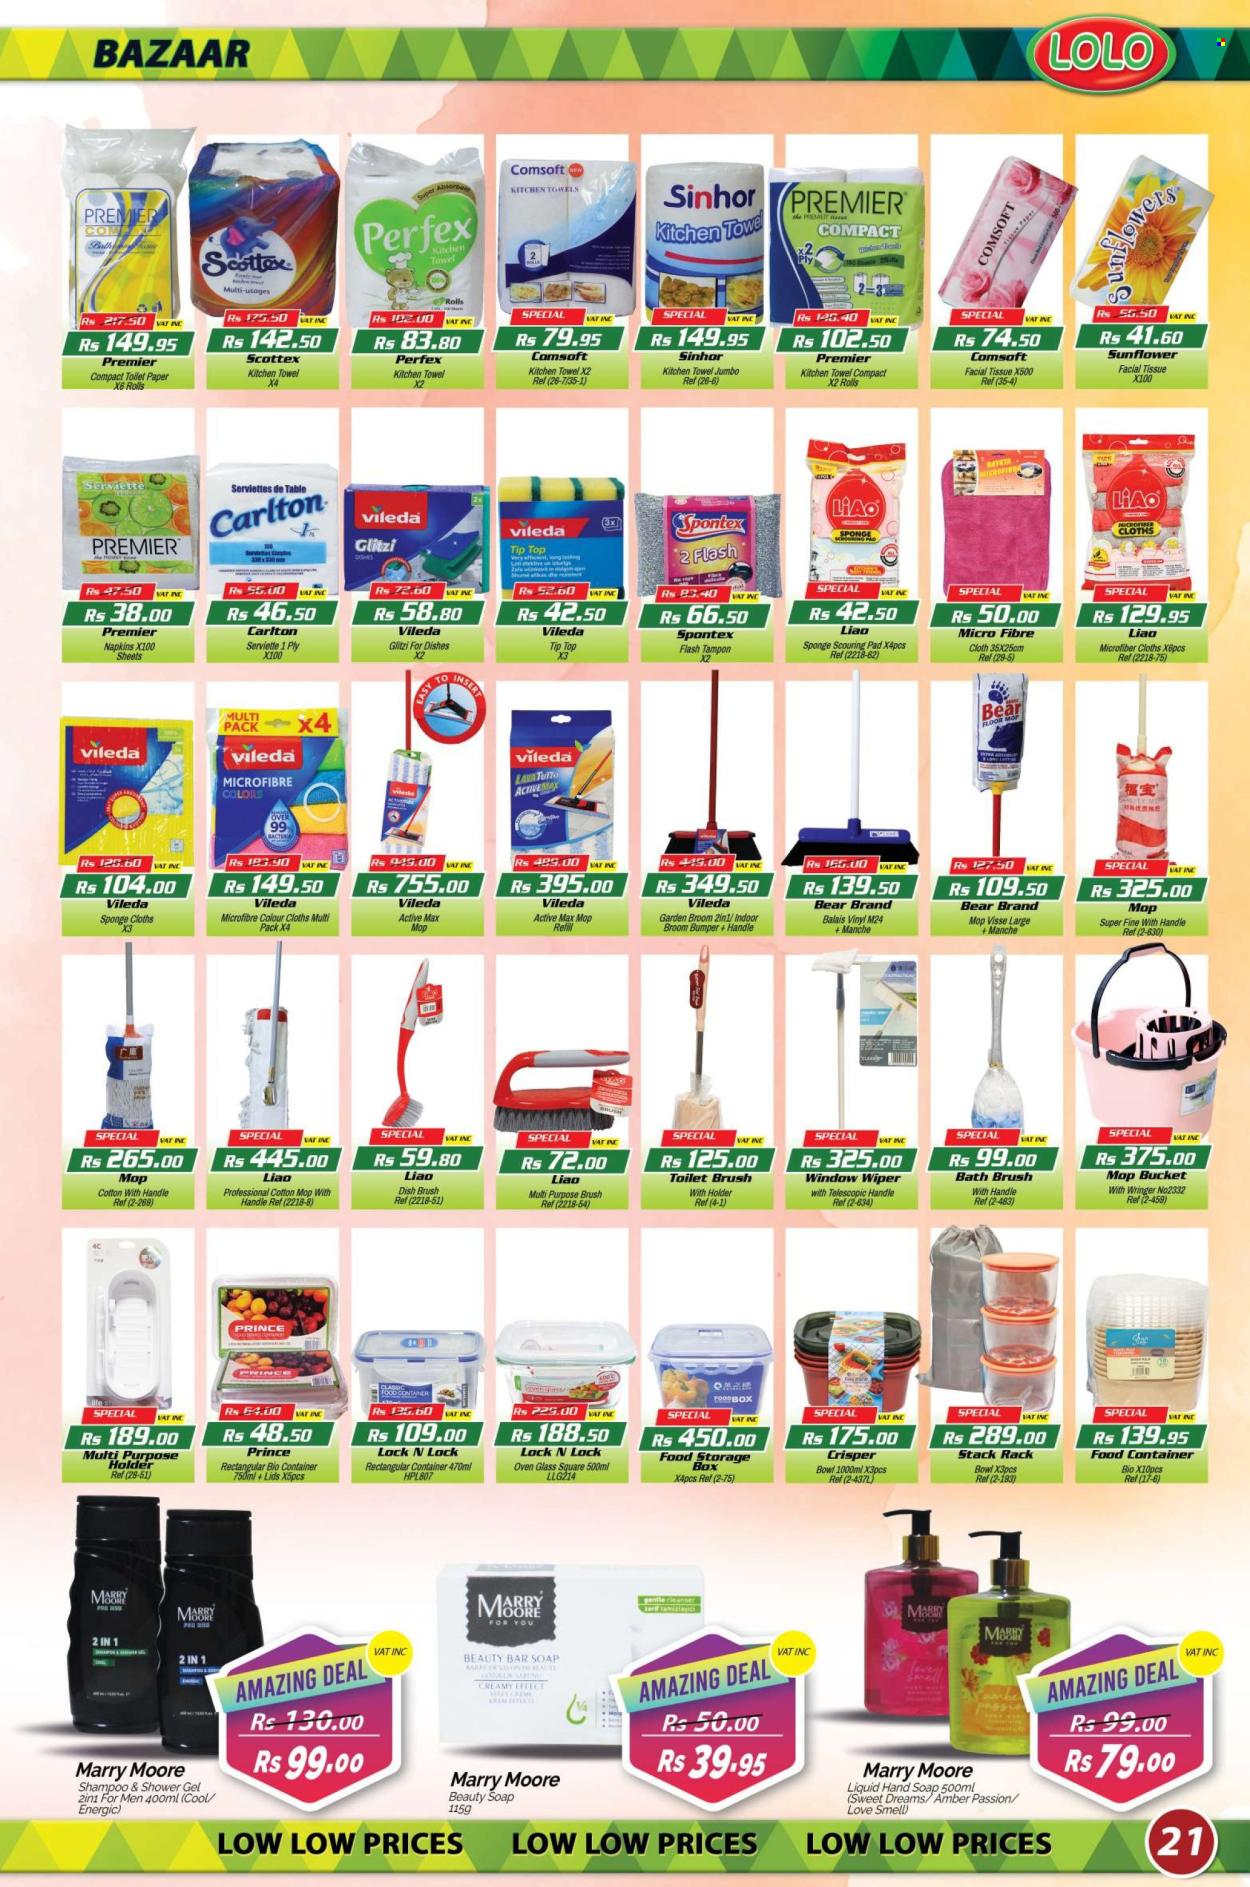 thumbnail - LOLO Hyper Catalogue - 27.04.2024 - 15.05.2024 - Sales products - Tip Top, napkins, toilet paper, tissues, kitchen towels, shampoo, shower gel, hand soap, soap bar, soap, tampons, cleanser, facial tissues, Vileda, serviettes, bucket, microfiber towel, broom, mop pad, mop bucket, cloths, sponge cloth, dish brush, container, storage box, meal box, sunflower, flowers. Page 21.